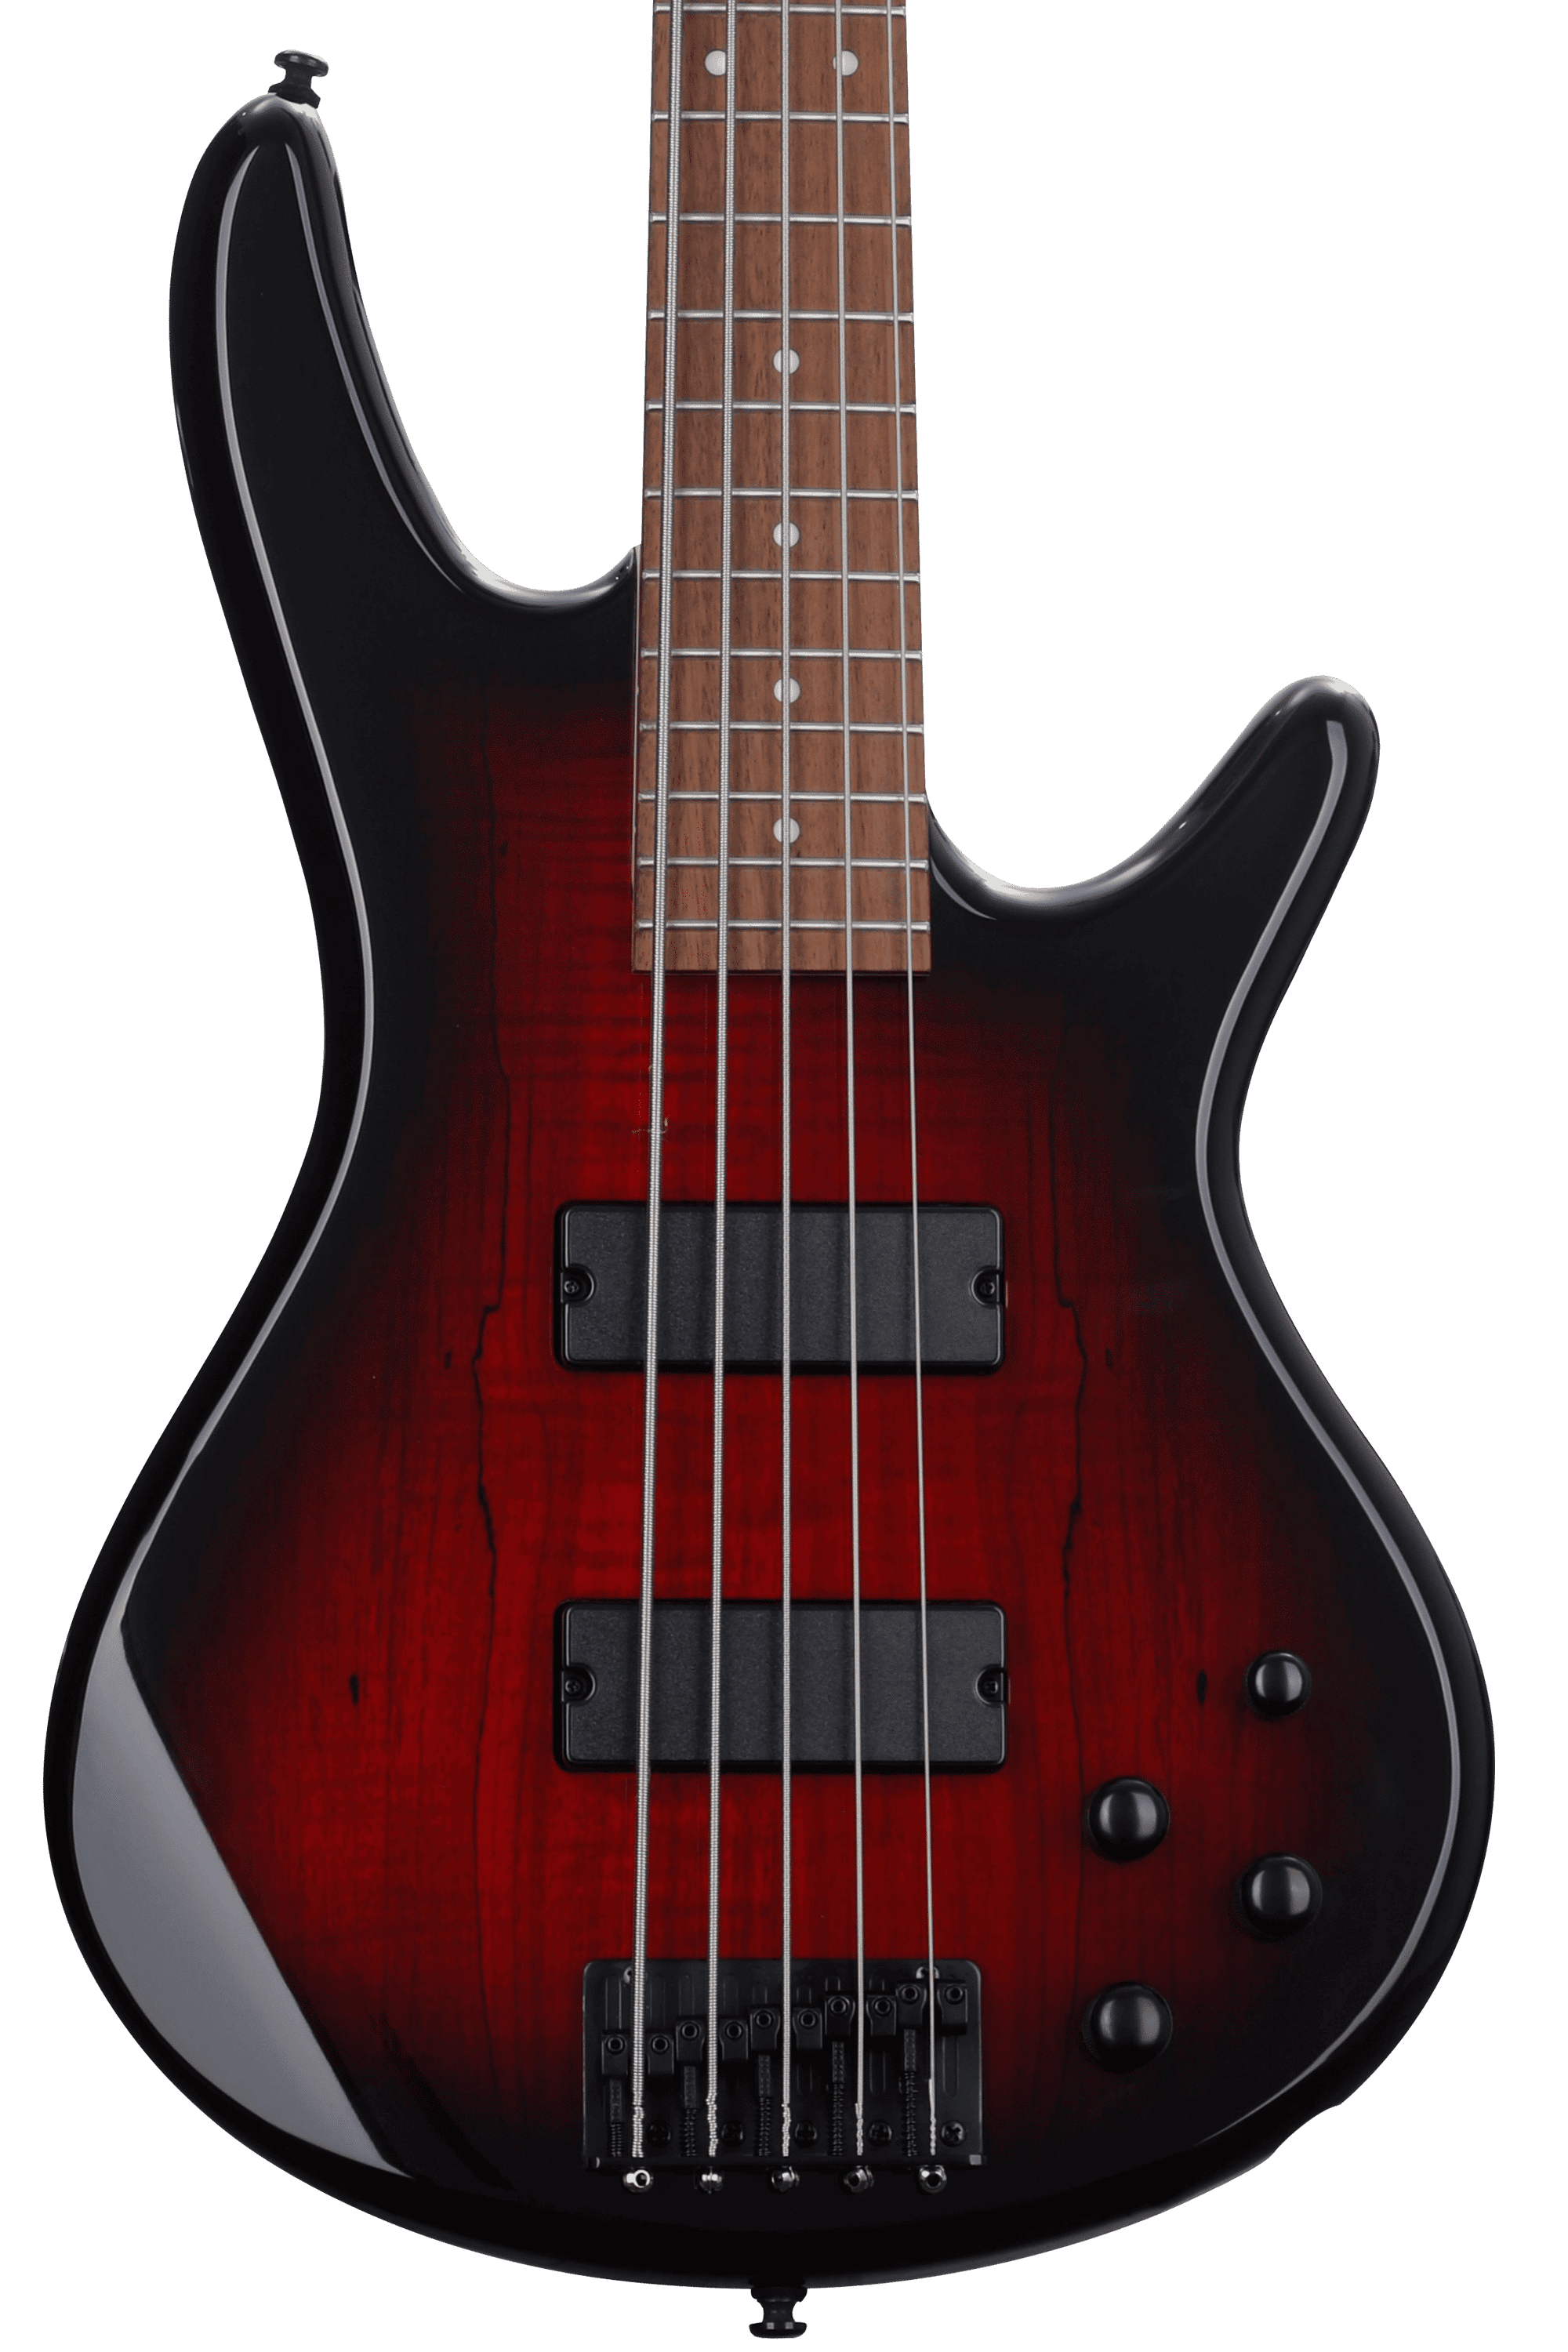 Ibanez Gio GSR205SMCNB Bass Guitar - Spalted Maple, Charcoal Brown 